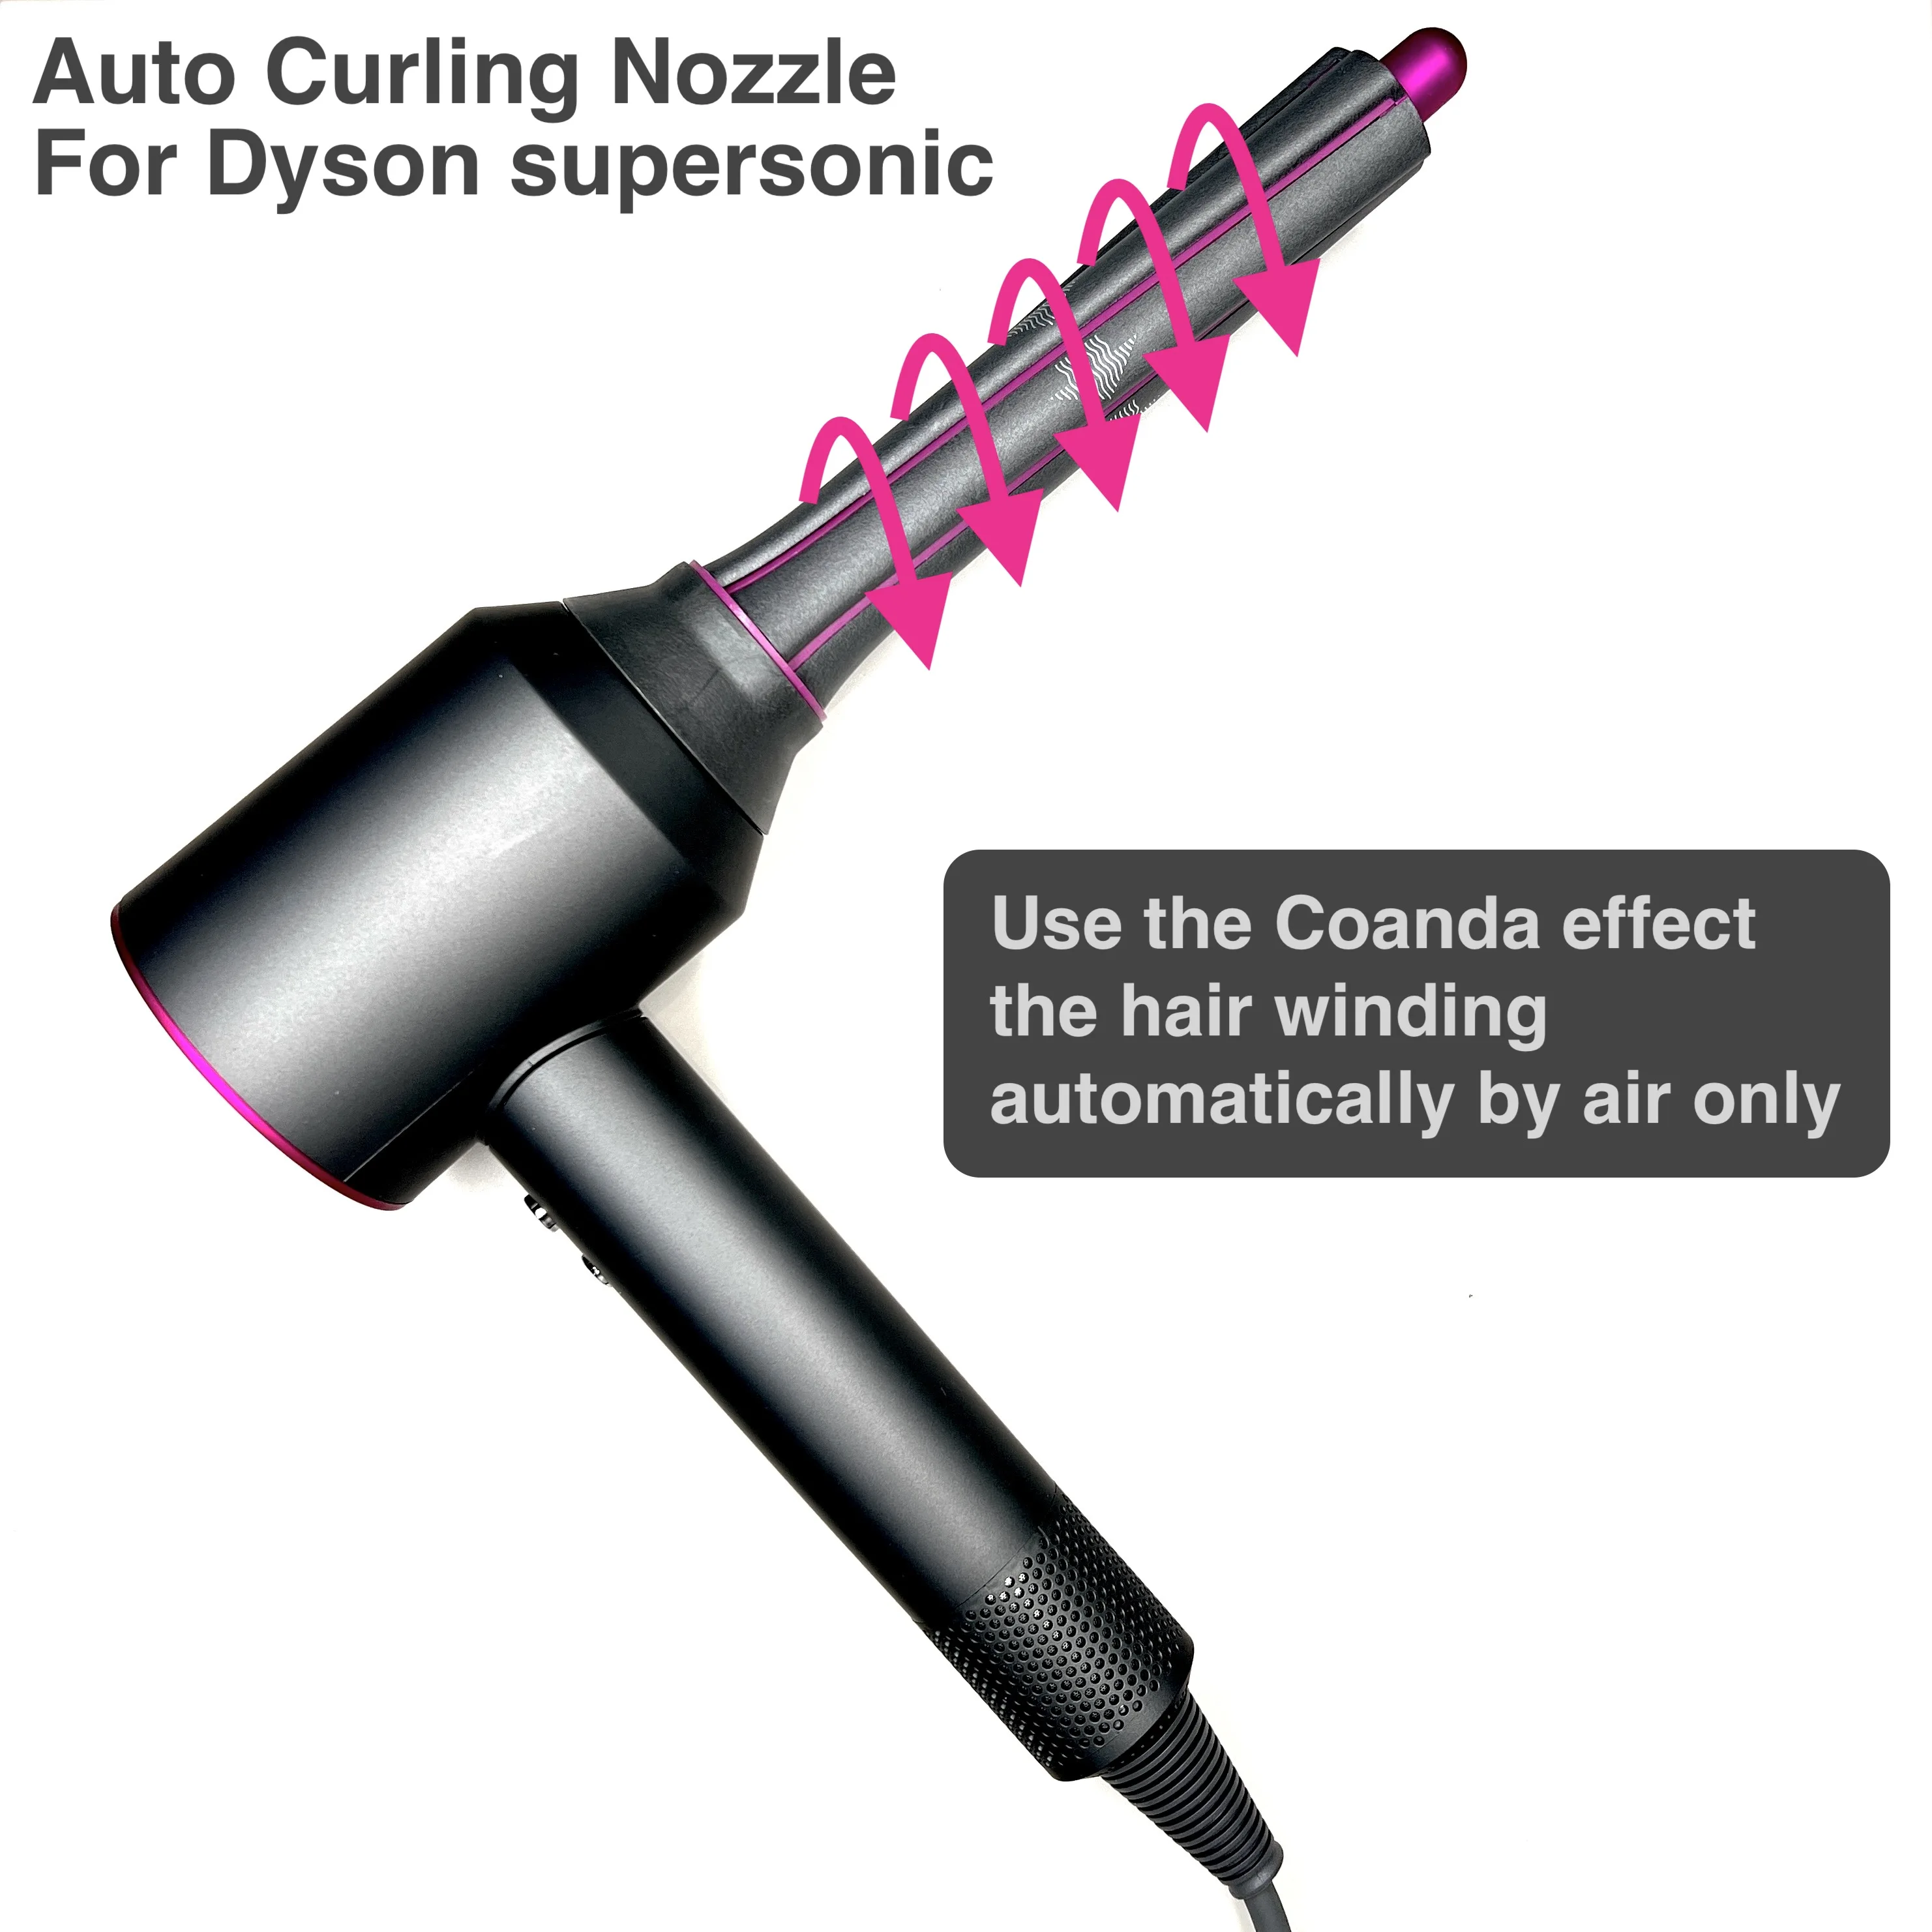 

New Curling Attachment For Dyson Supersonic Hairdryer Curling Nozzle For Super Hair Dryer Curler Curling Adapter For Dyson